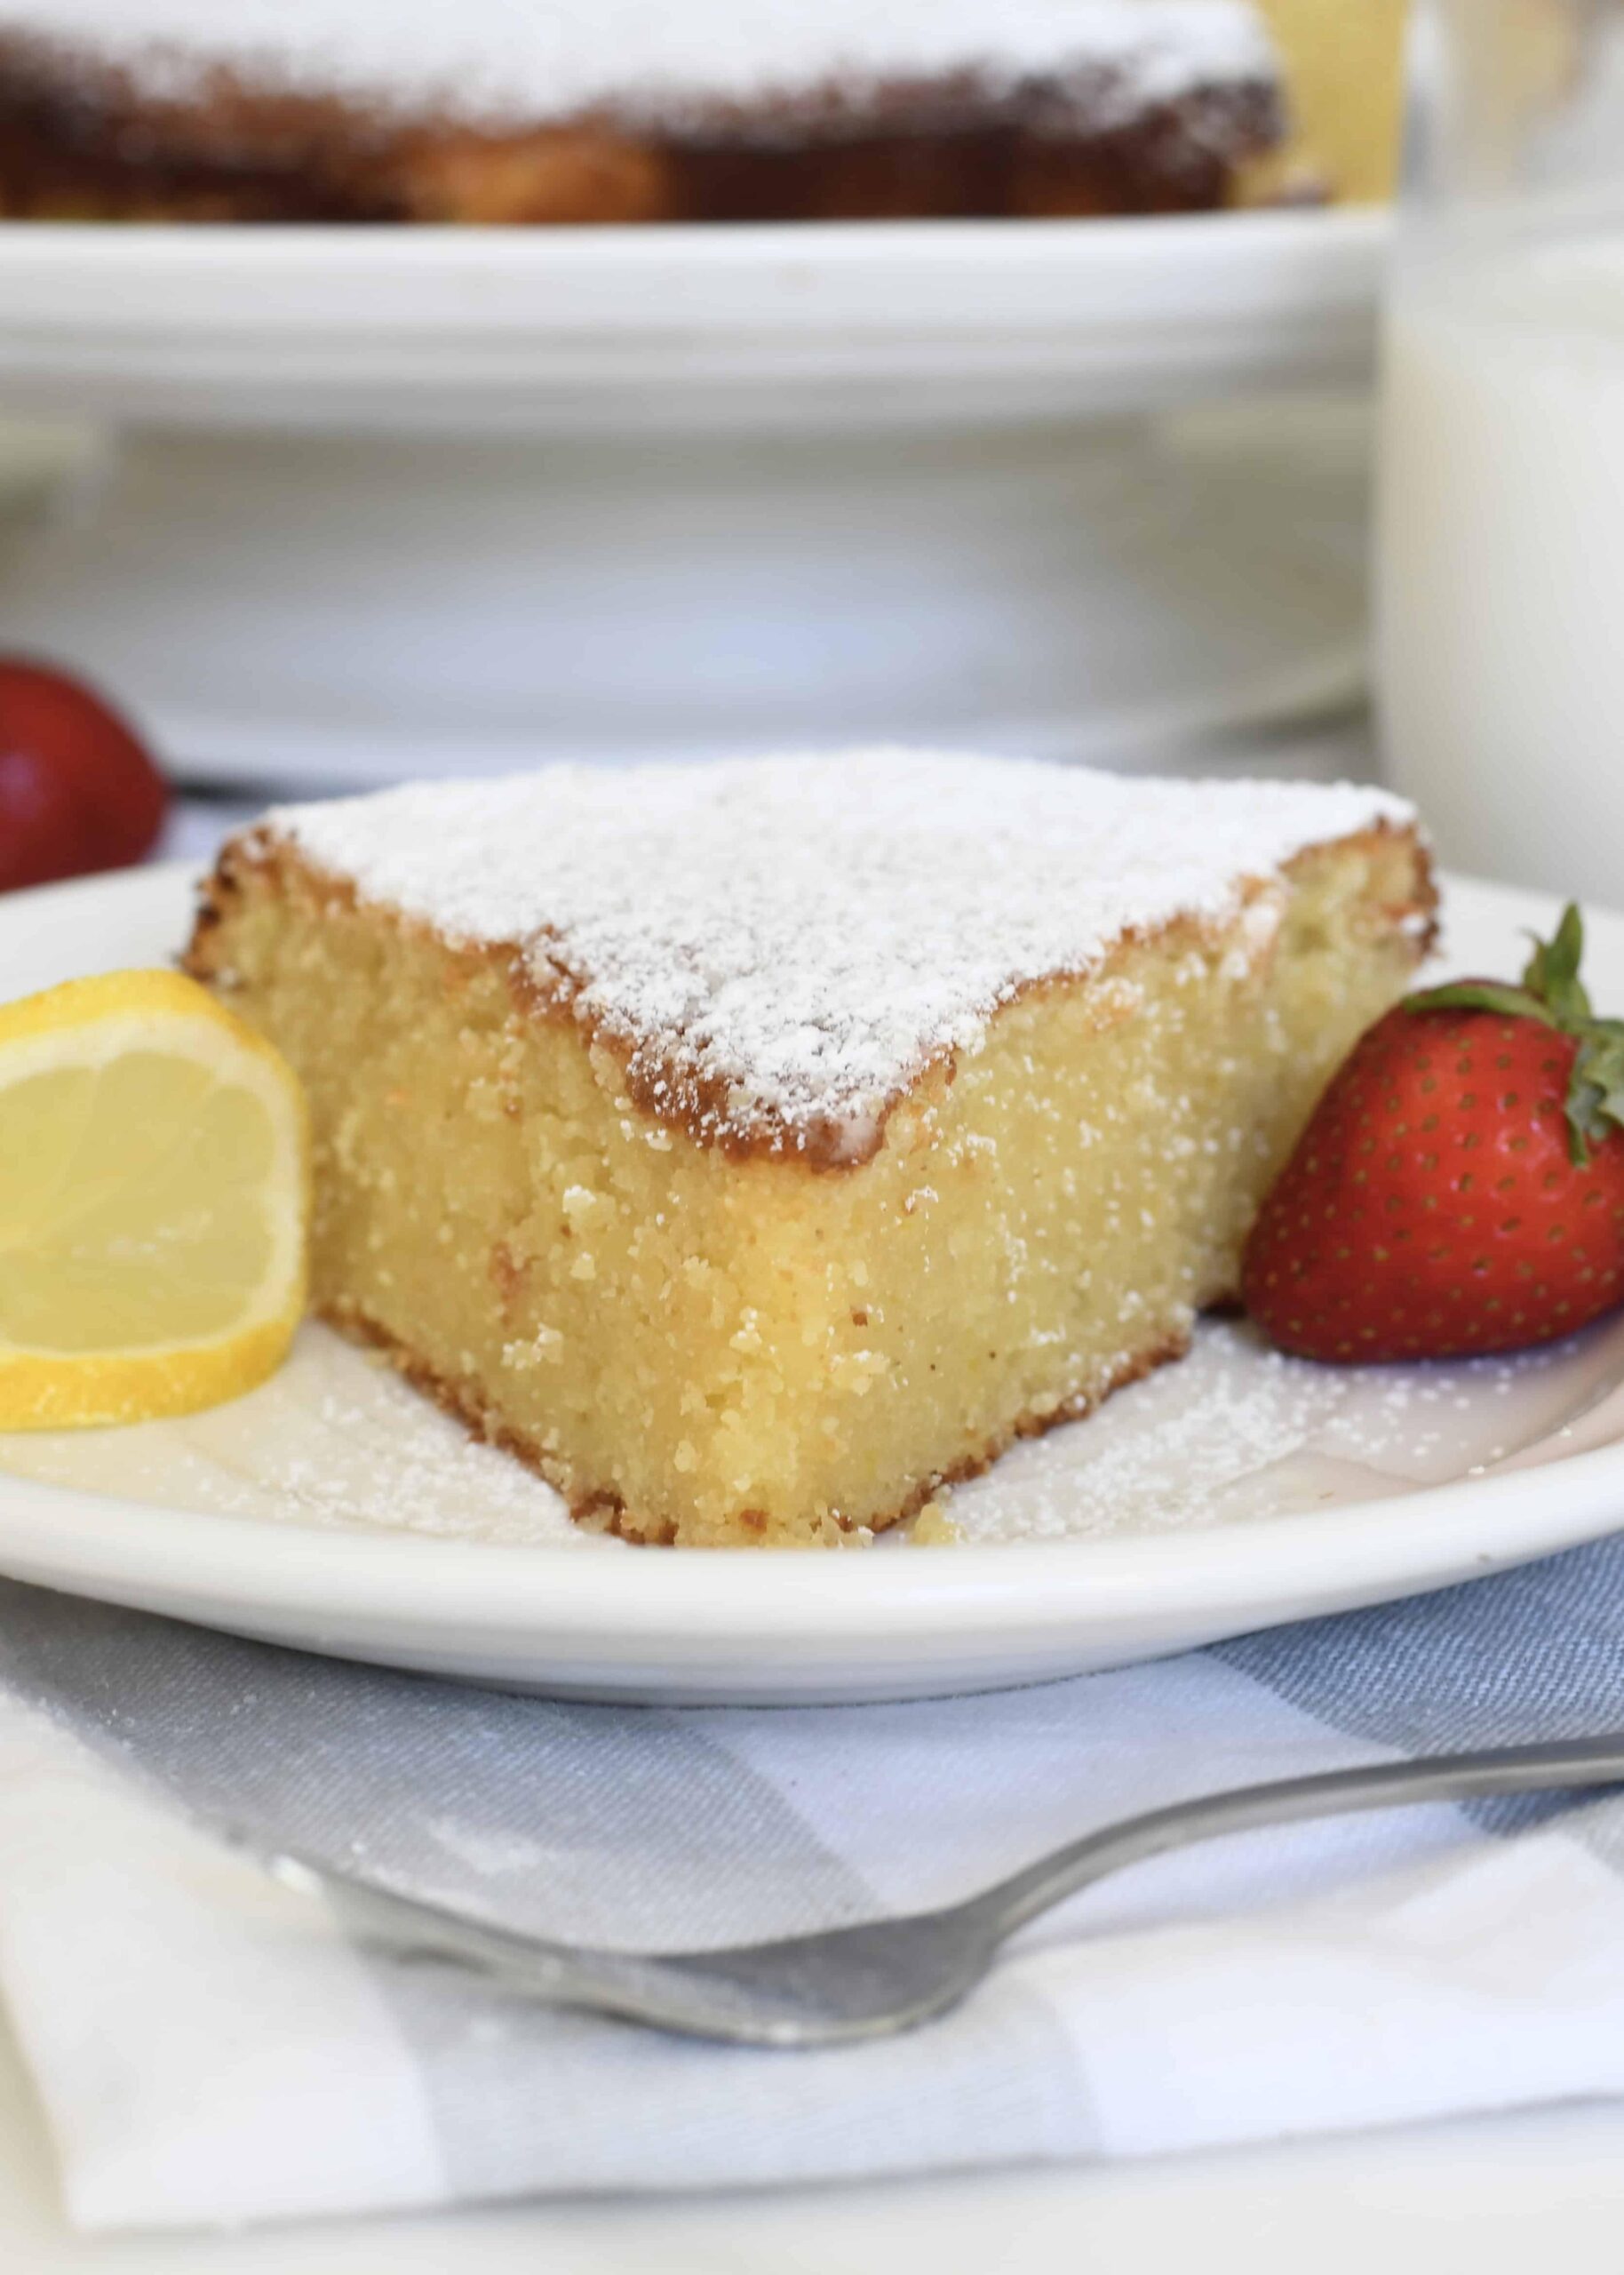  Looking for the perfect brunch creation? This cake is a must-try!